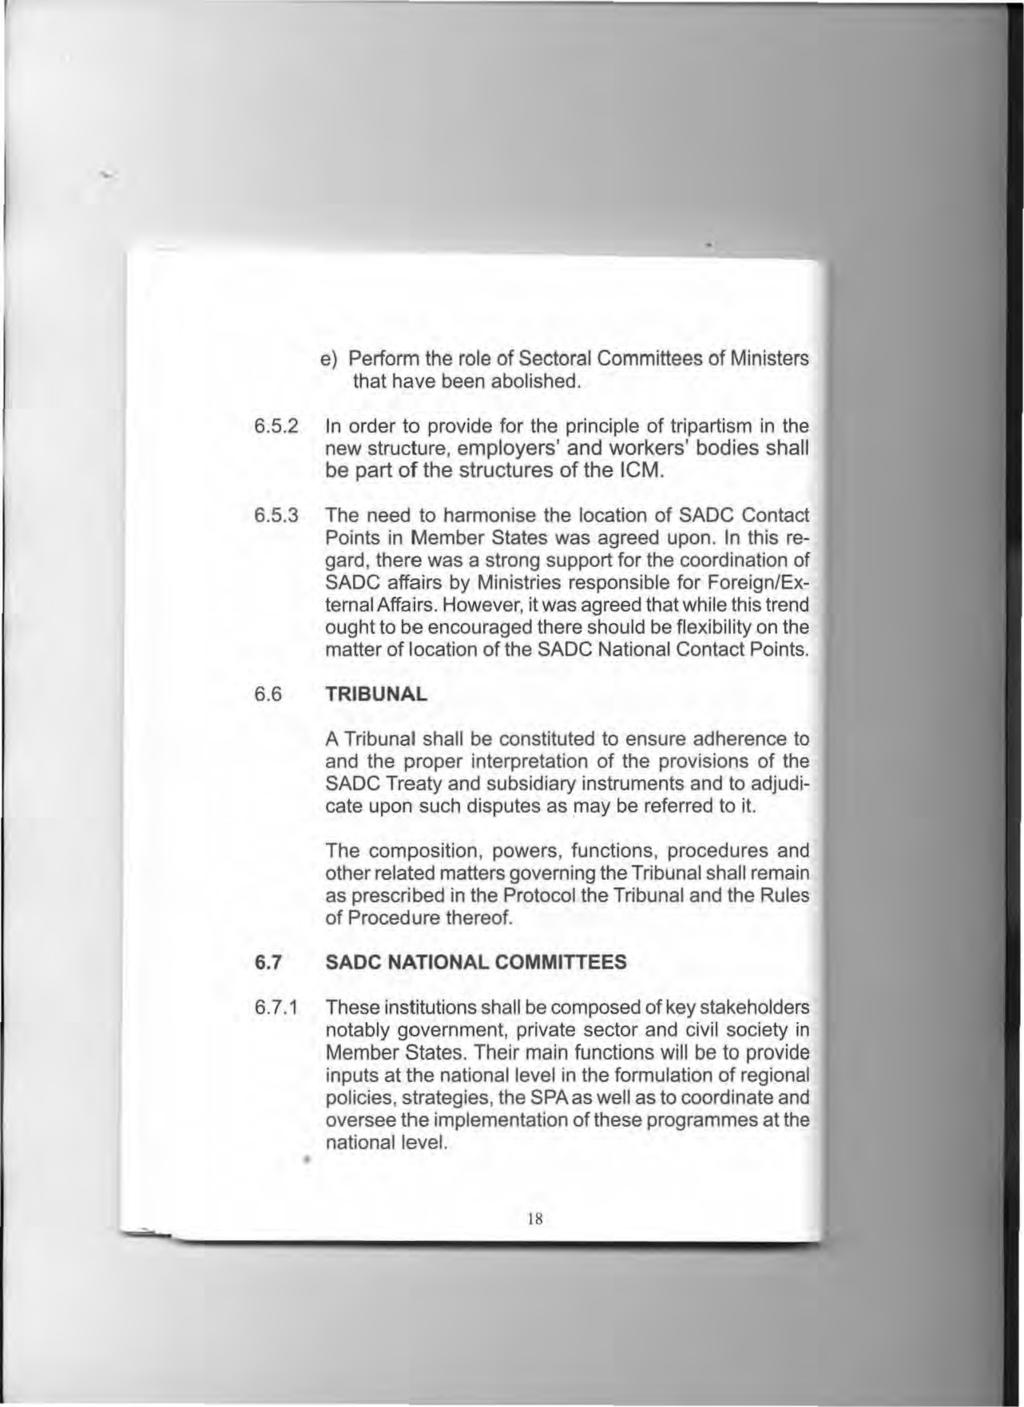 e) Perform the role of Sectoral Committees of Ministers that have been abolished. 6.5.